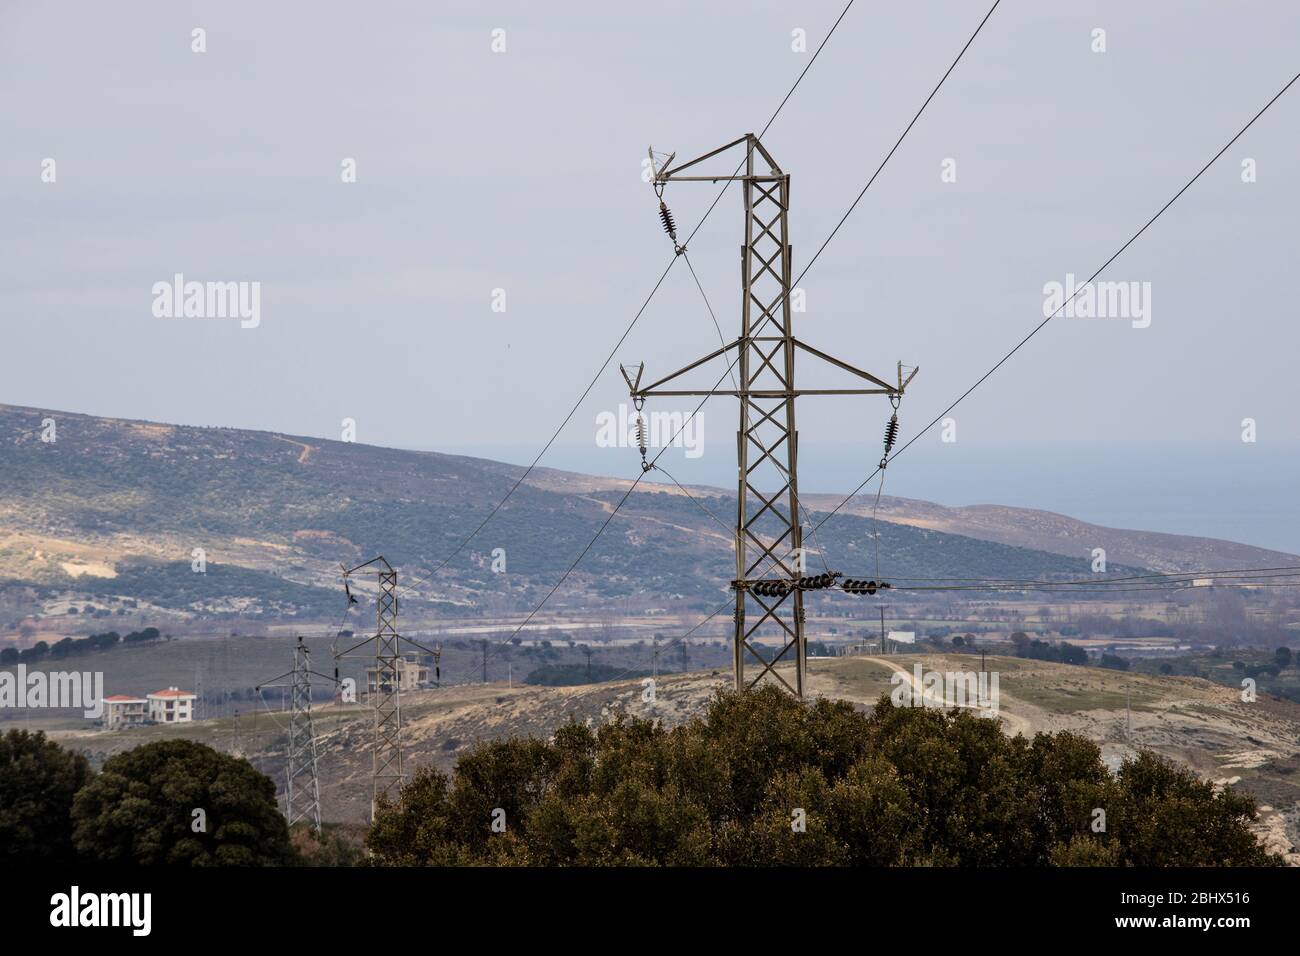 Power lines and transformers. There is a tree on the left and the weather is cloudy. Photographed in the winter. Stock Photo